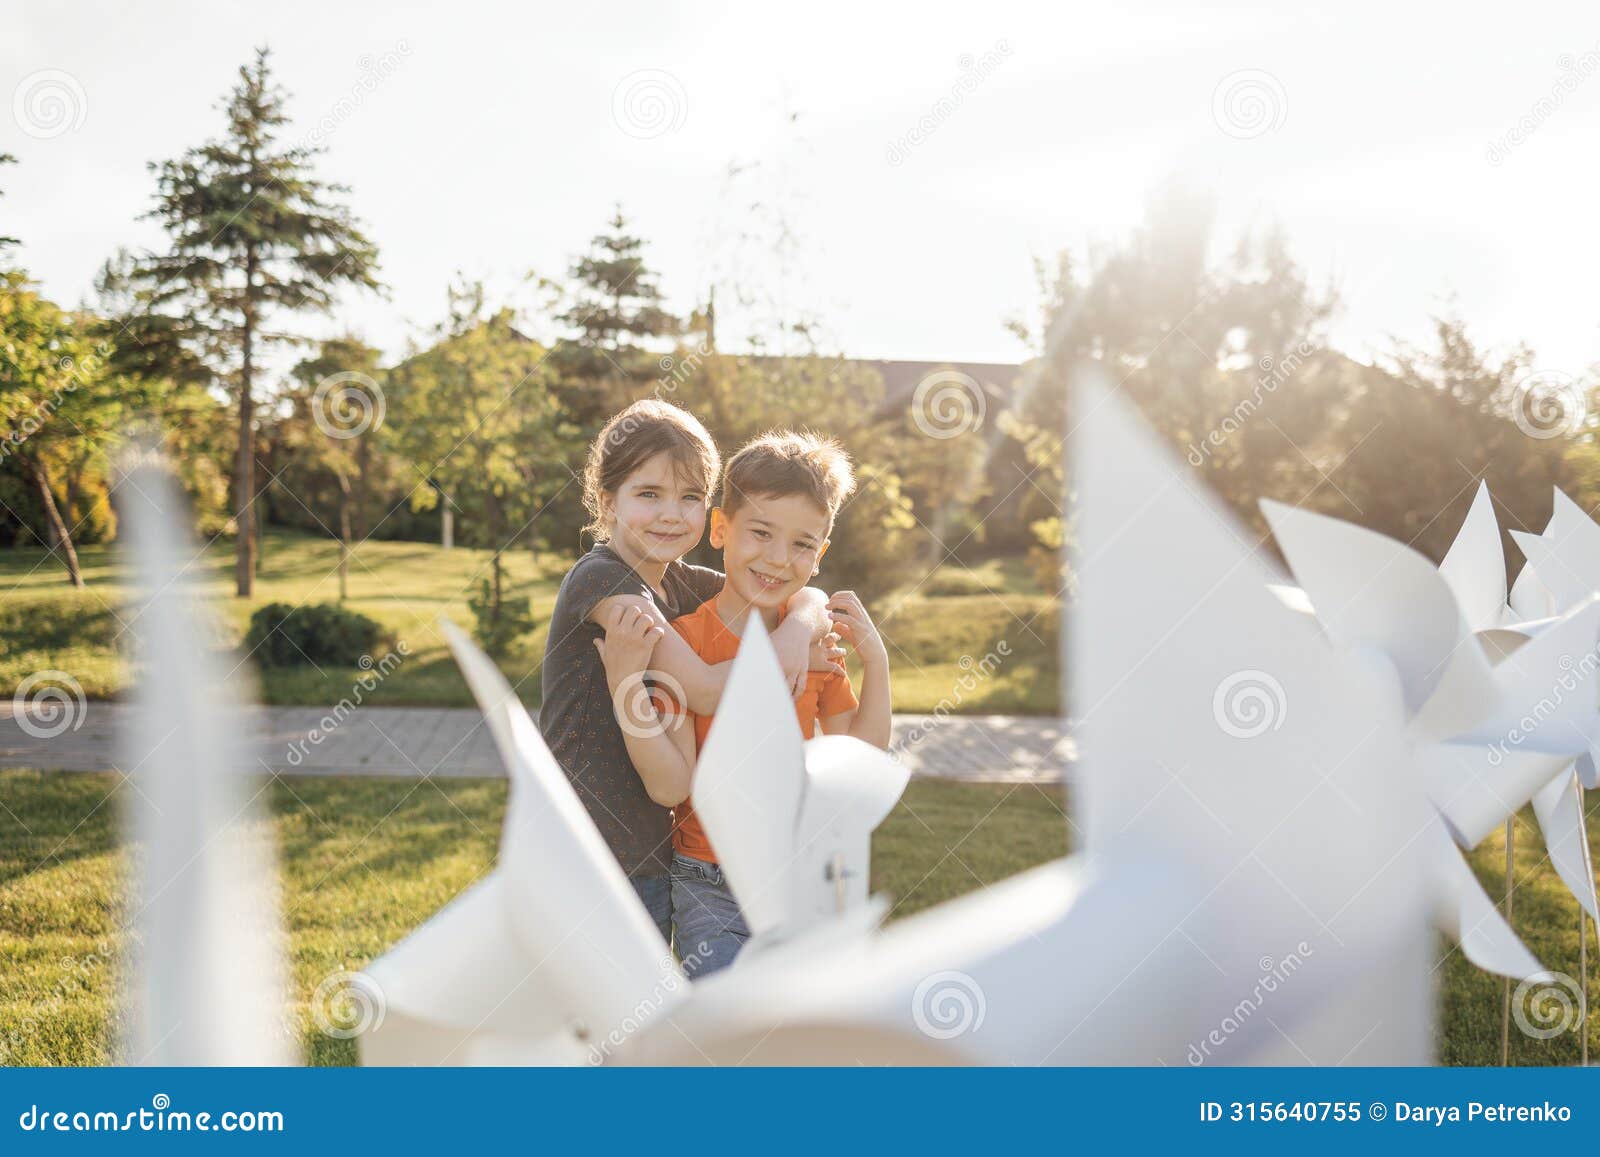 two cute kids cuddle in the backyard of the house. brother and sister near the white wind turbines. a boy and a girl have fun on a